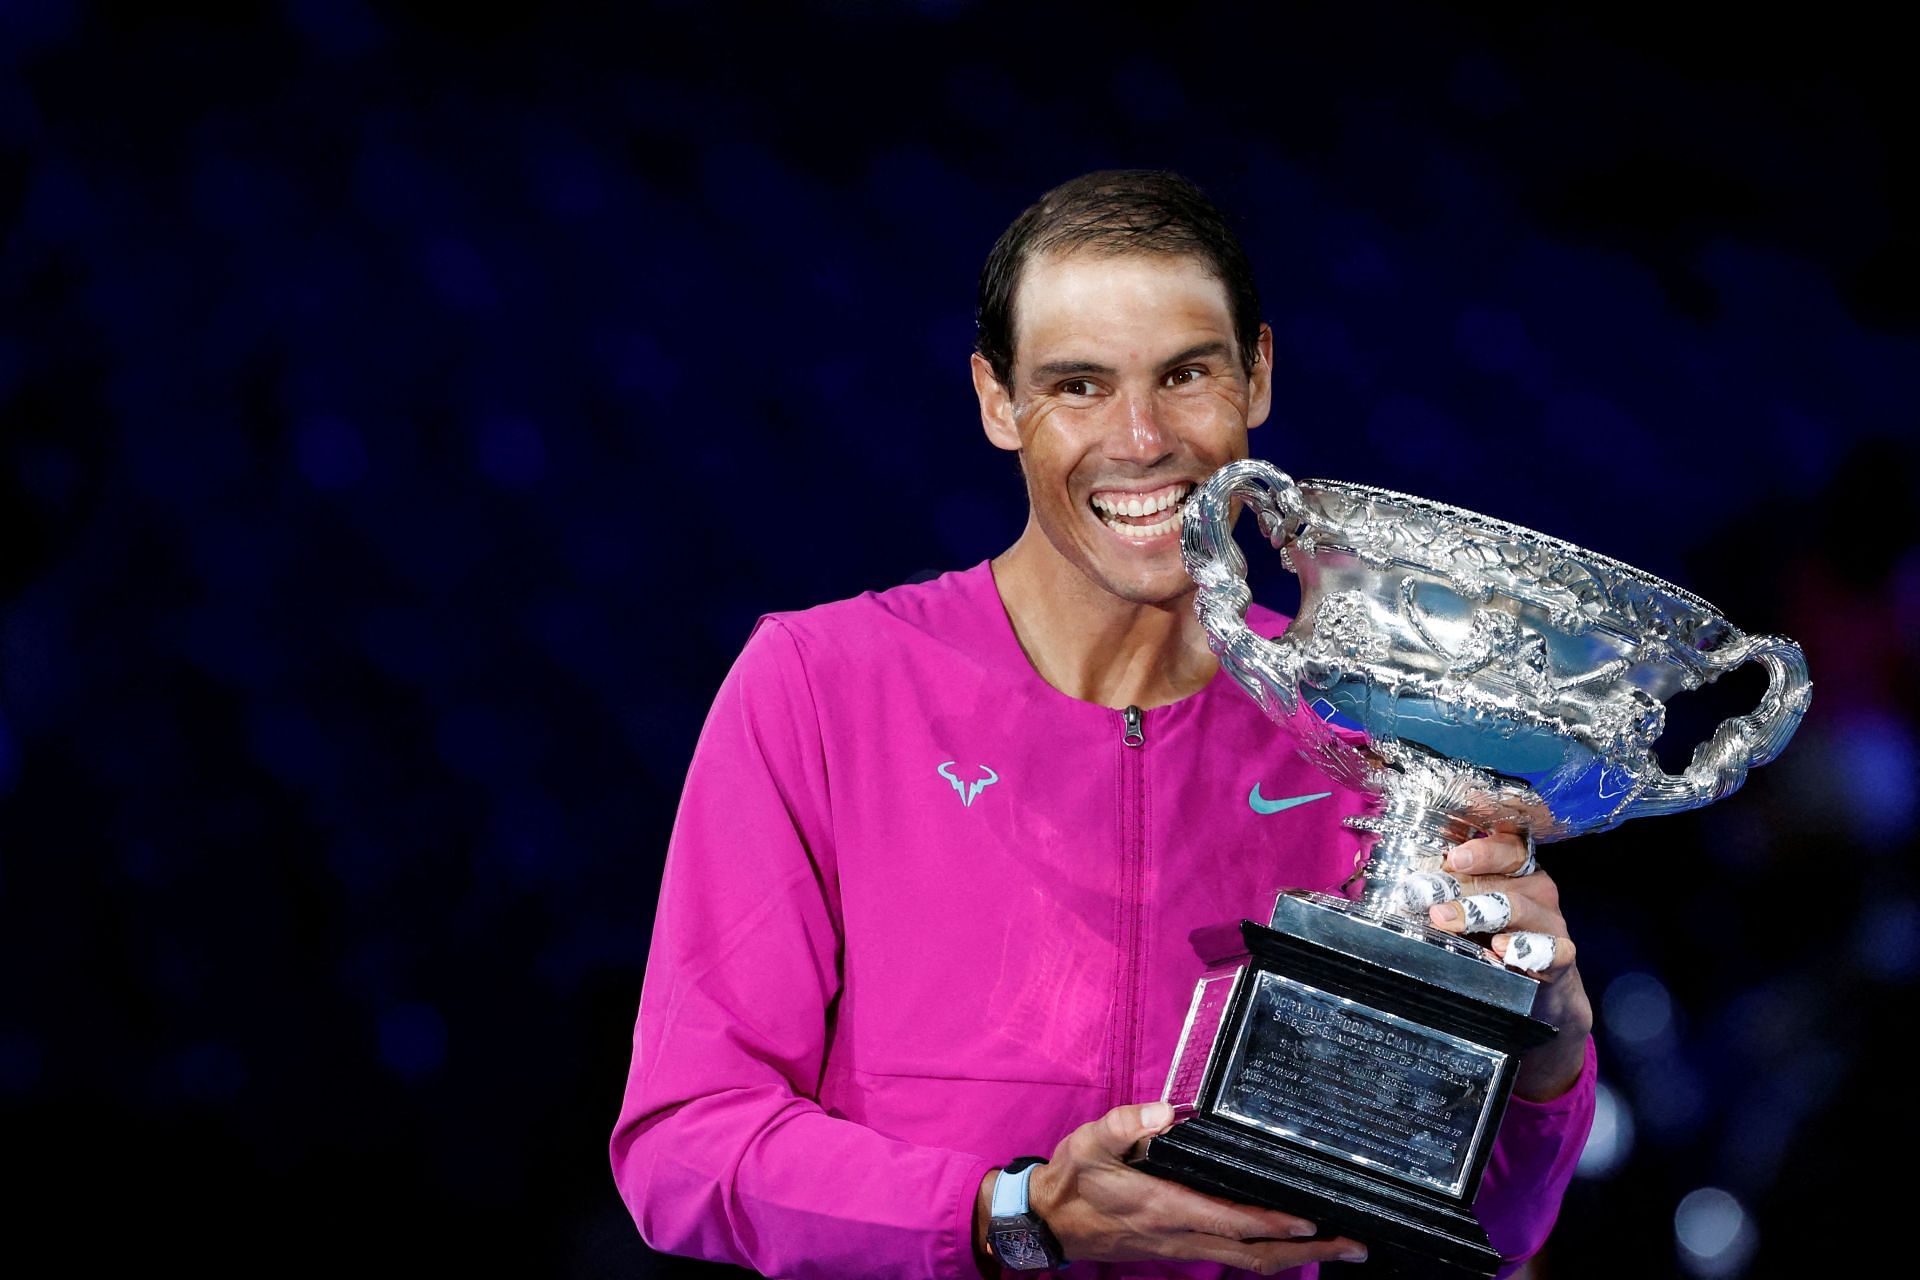 The Matador poses with the 2022 Australian Open trophy